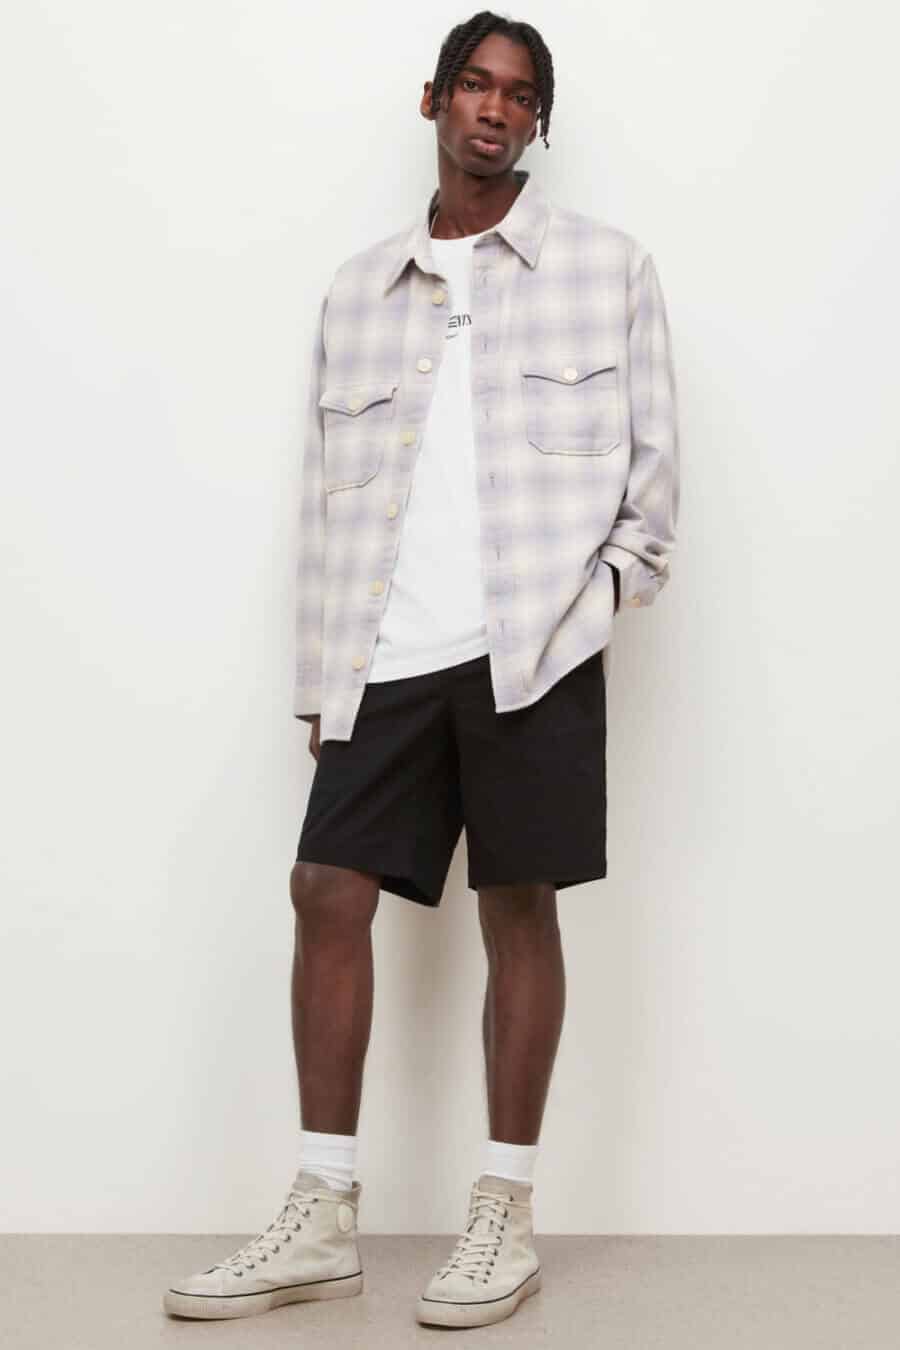 Men's grunge shorts outfit with check overshirt and canvas high top sneakers